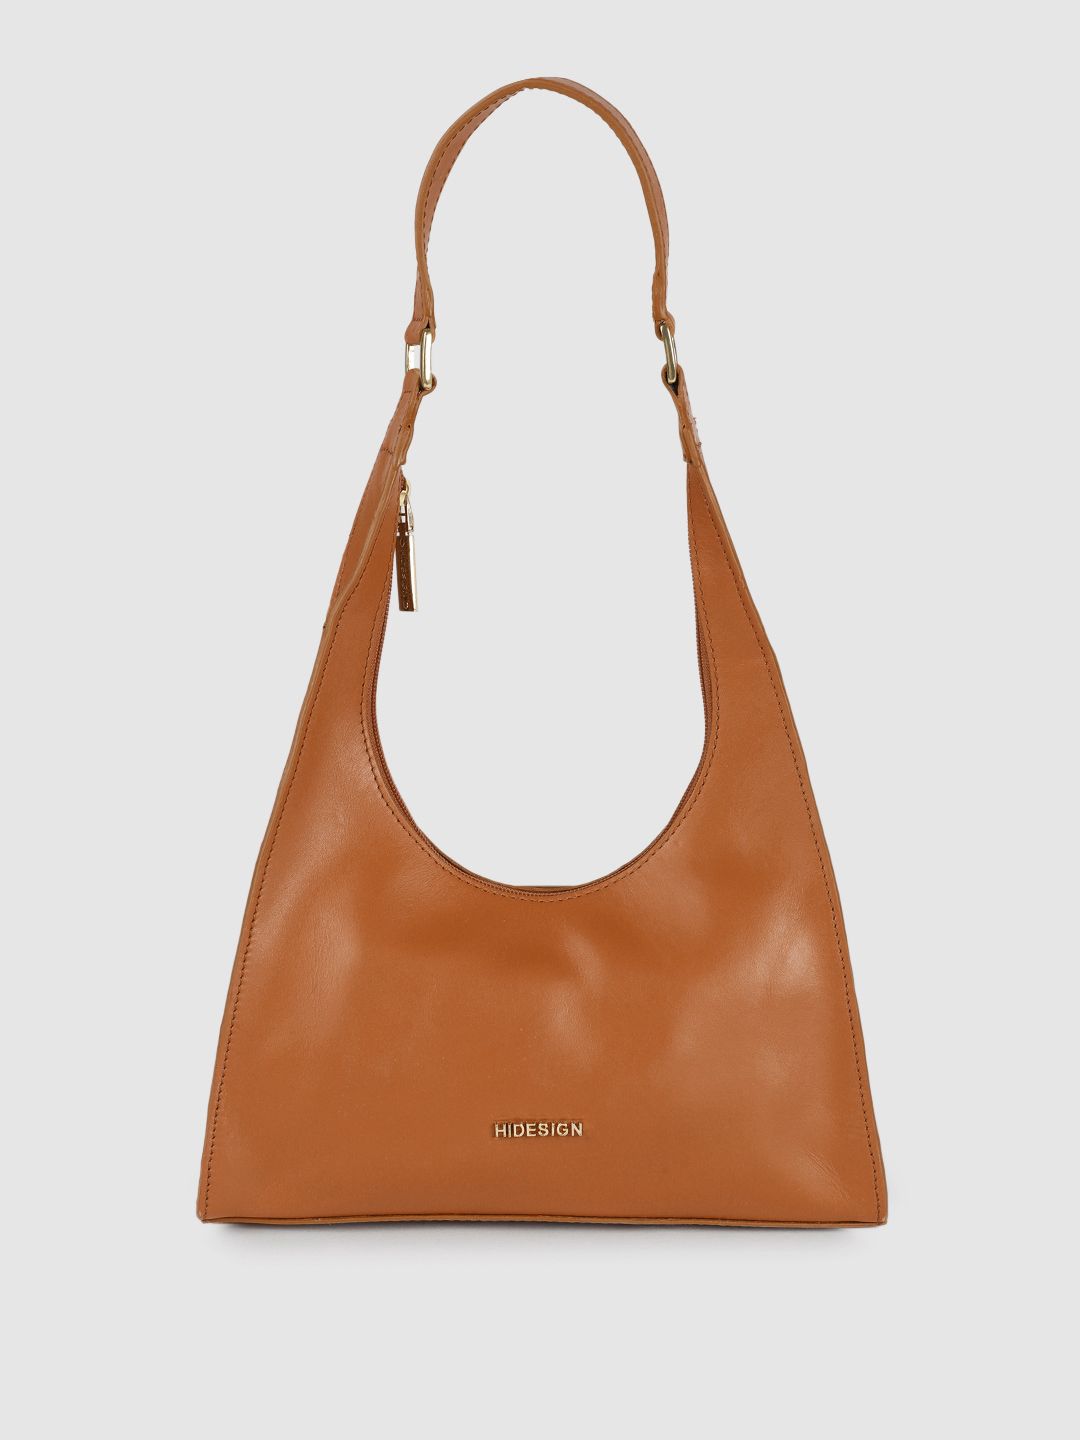 Hidesign Brown Leather Structured Hobo Bag Price in India